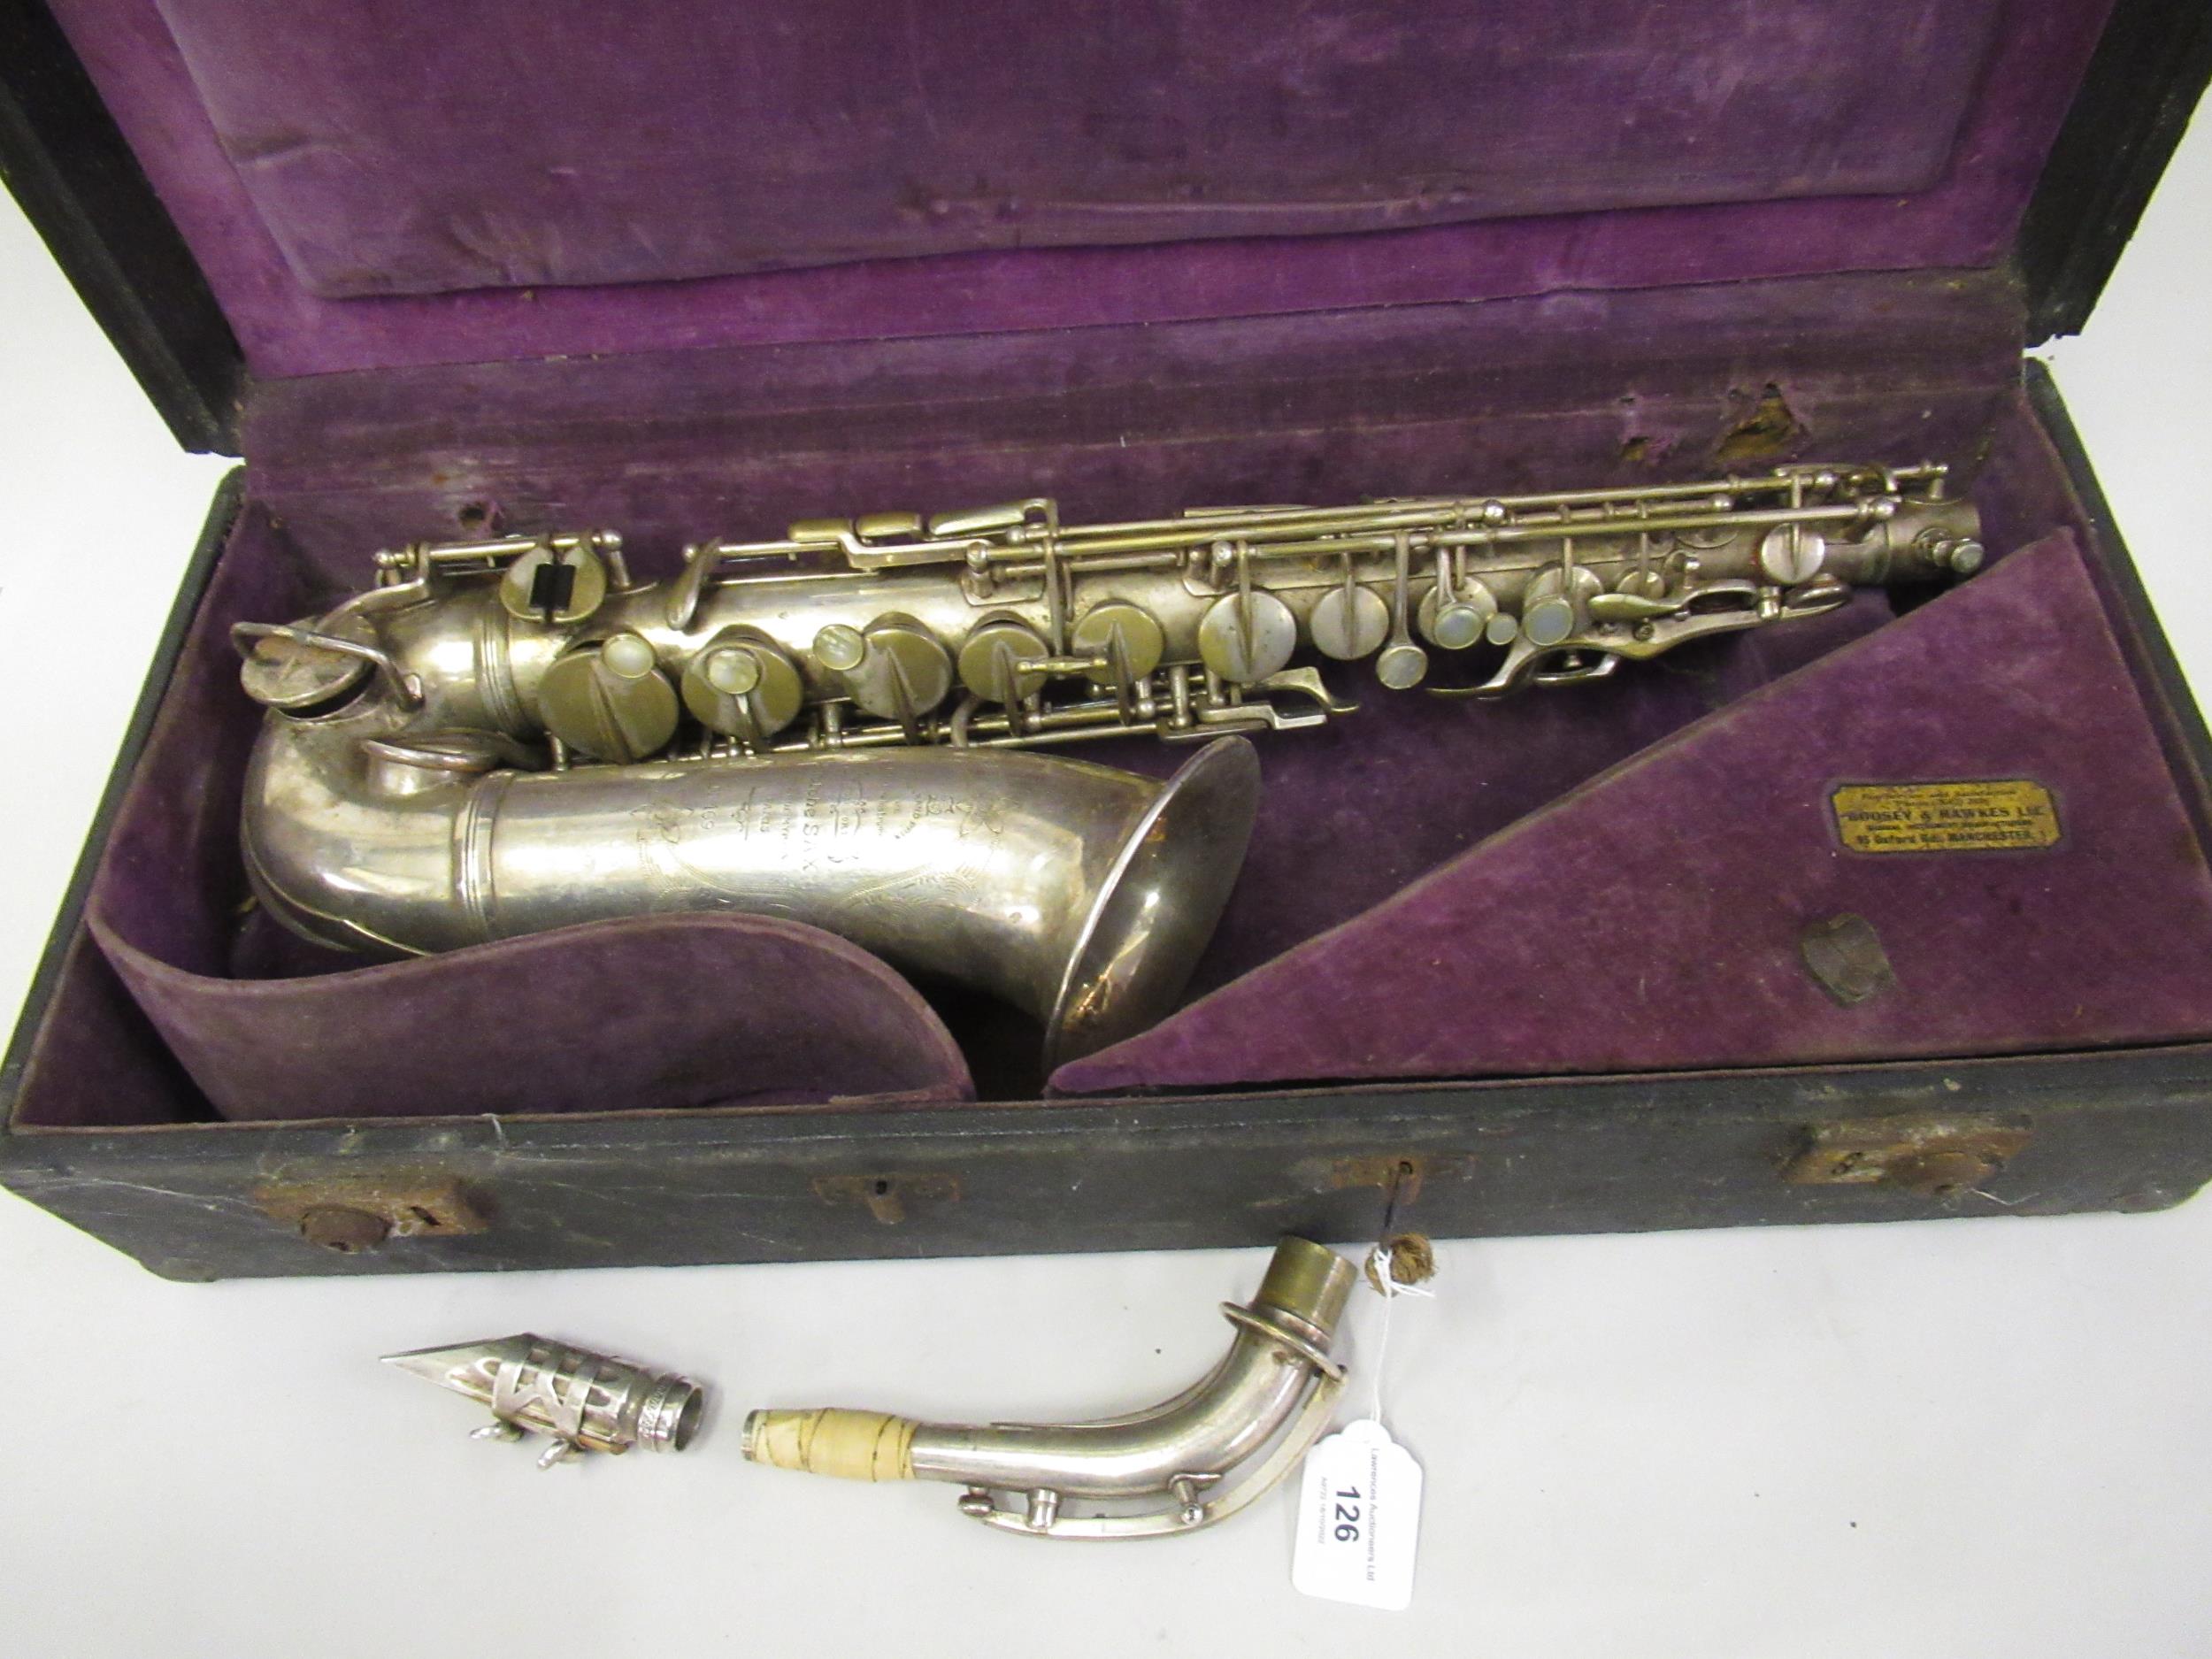 Late 19th / early 20th Century silvered brass alto saxophone by Antoine-Joseph ' Adolphe ' Sax, - Image 3 of 3